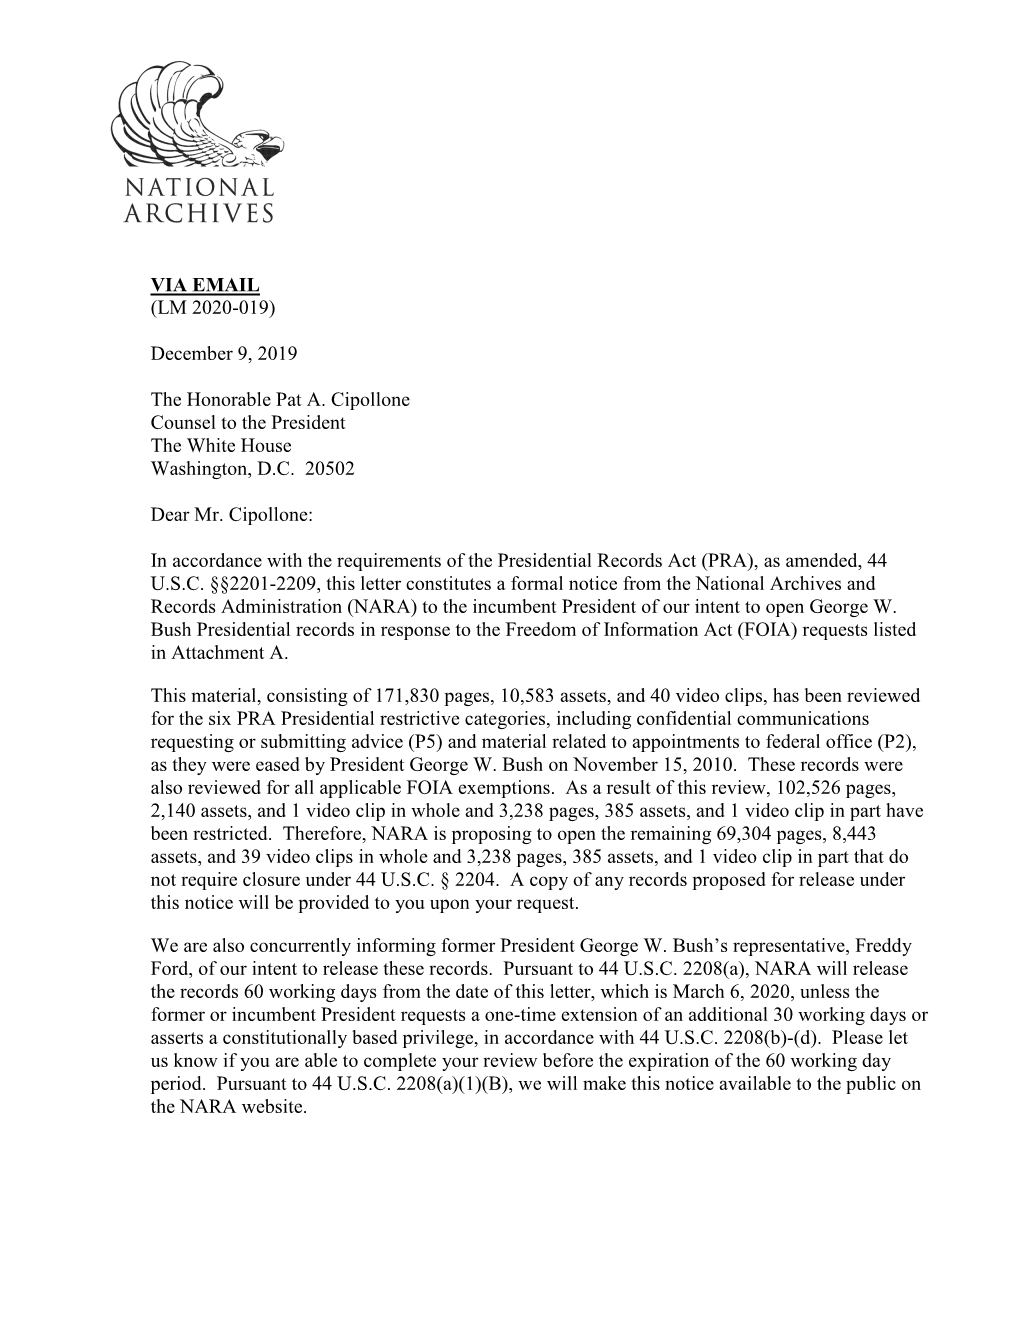 George W. Bush Presidential Records in Response to the Freedom of Information Act (FOIA) Requests Listed in Attachment A